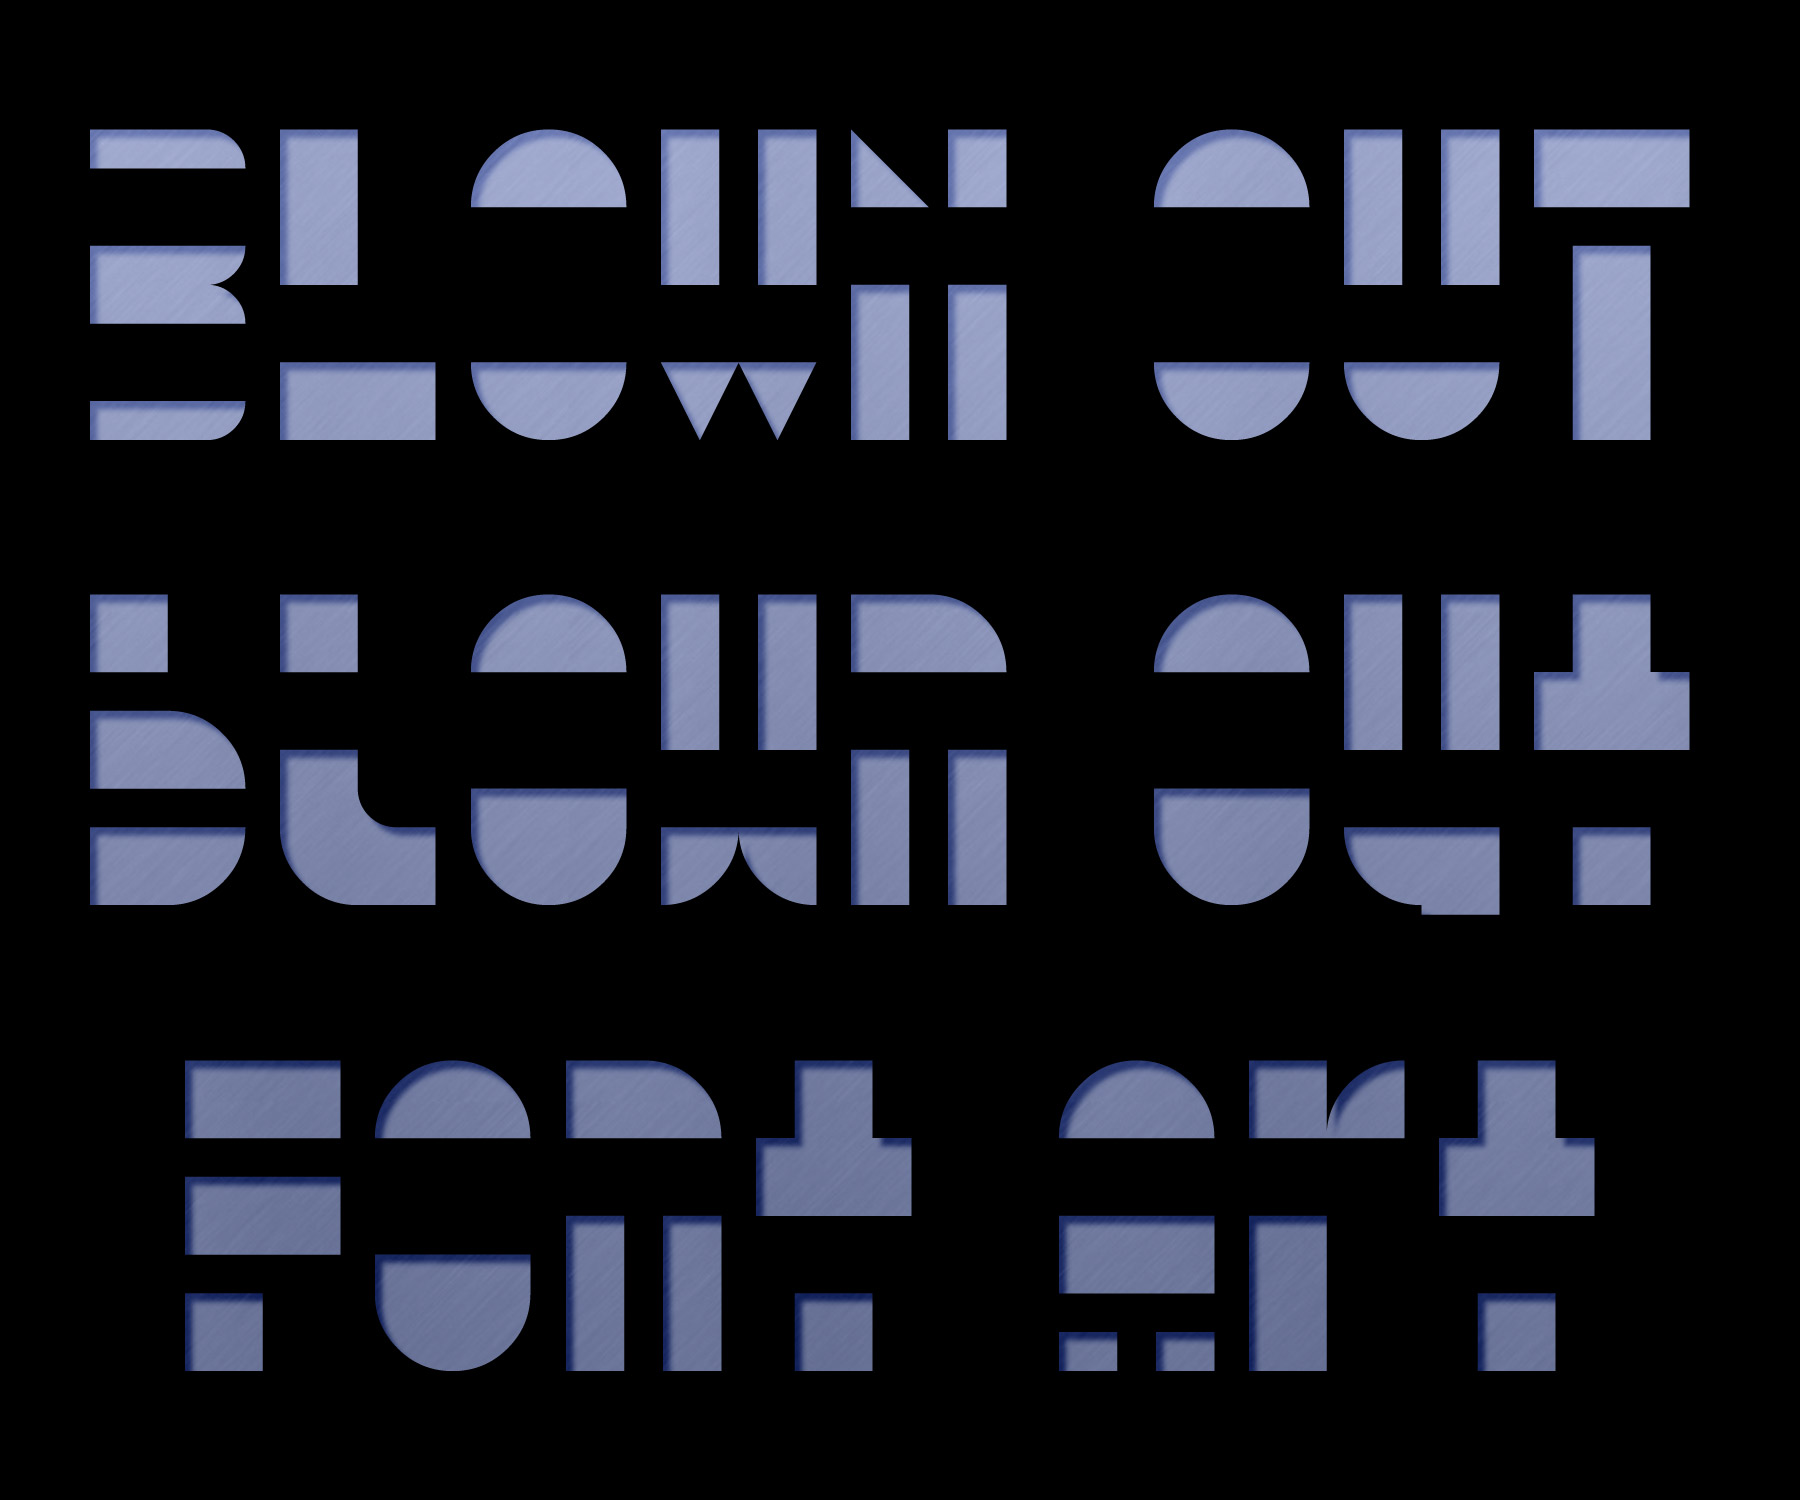 Blown Out freeware font text sample image.